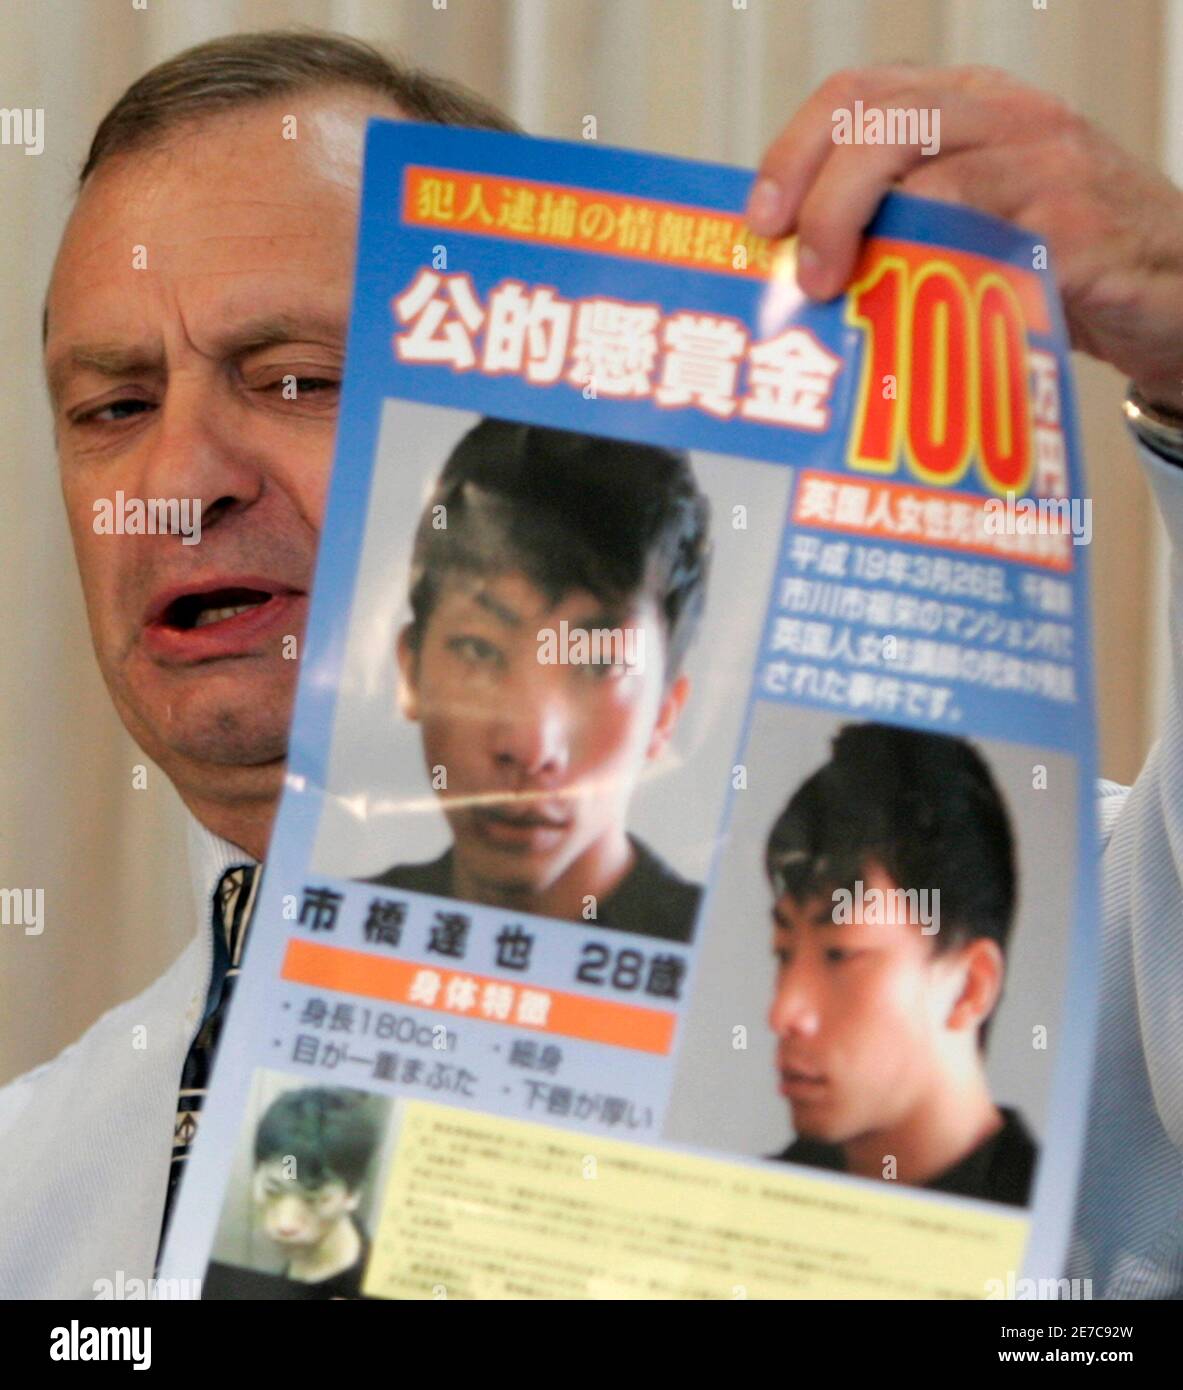 Bill Hawker The Father Of Lindsay Hawker Holds Up A Wanted Poster Showing 28 Year Old Tatsuya Ichihashi Wanted In Connection With Lindsay S Death During A News Conference At The British Embassy In Tokyo